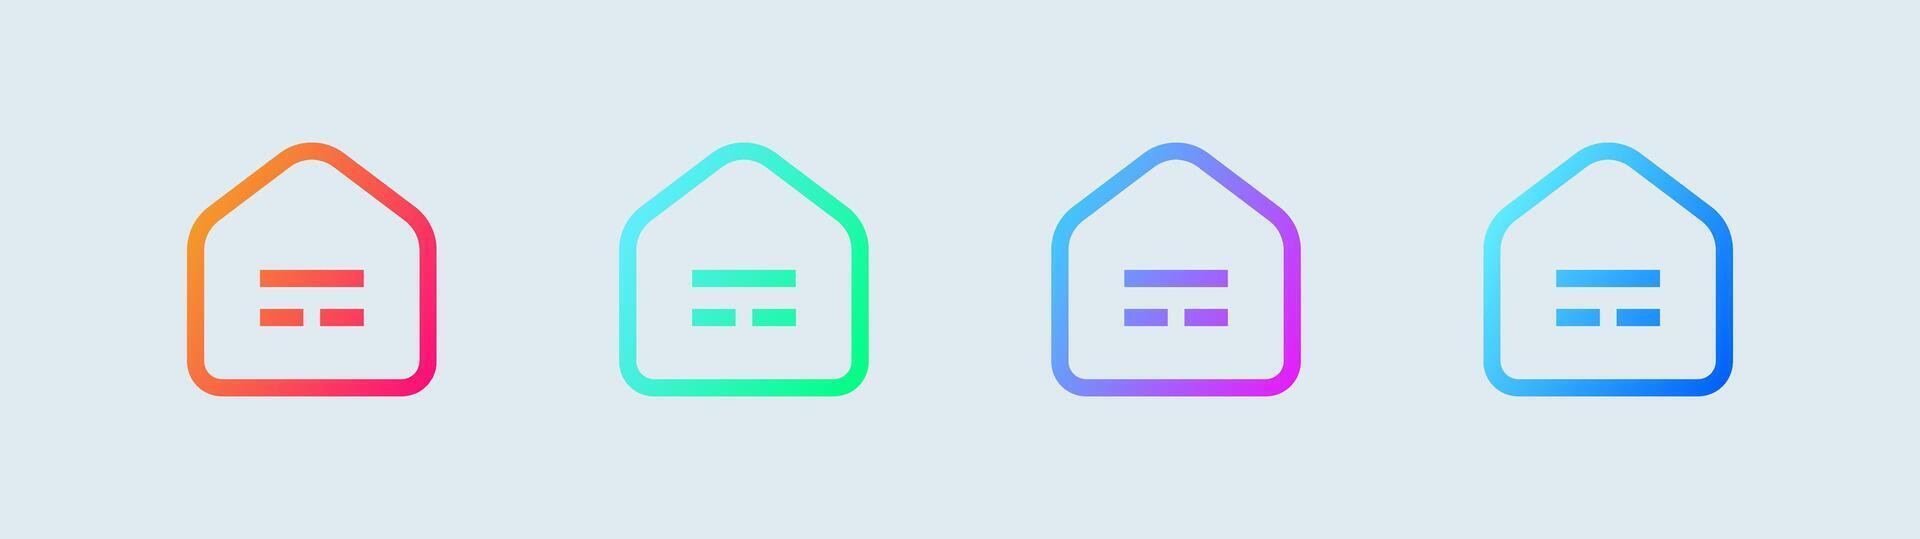 Home button line icon in gradient colors. House signs vector illustration.